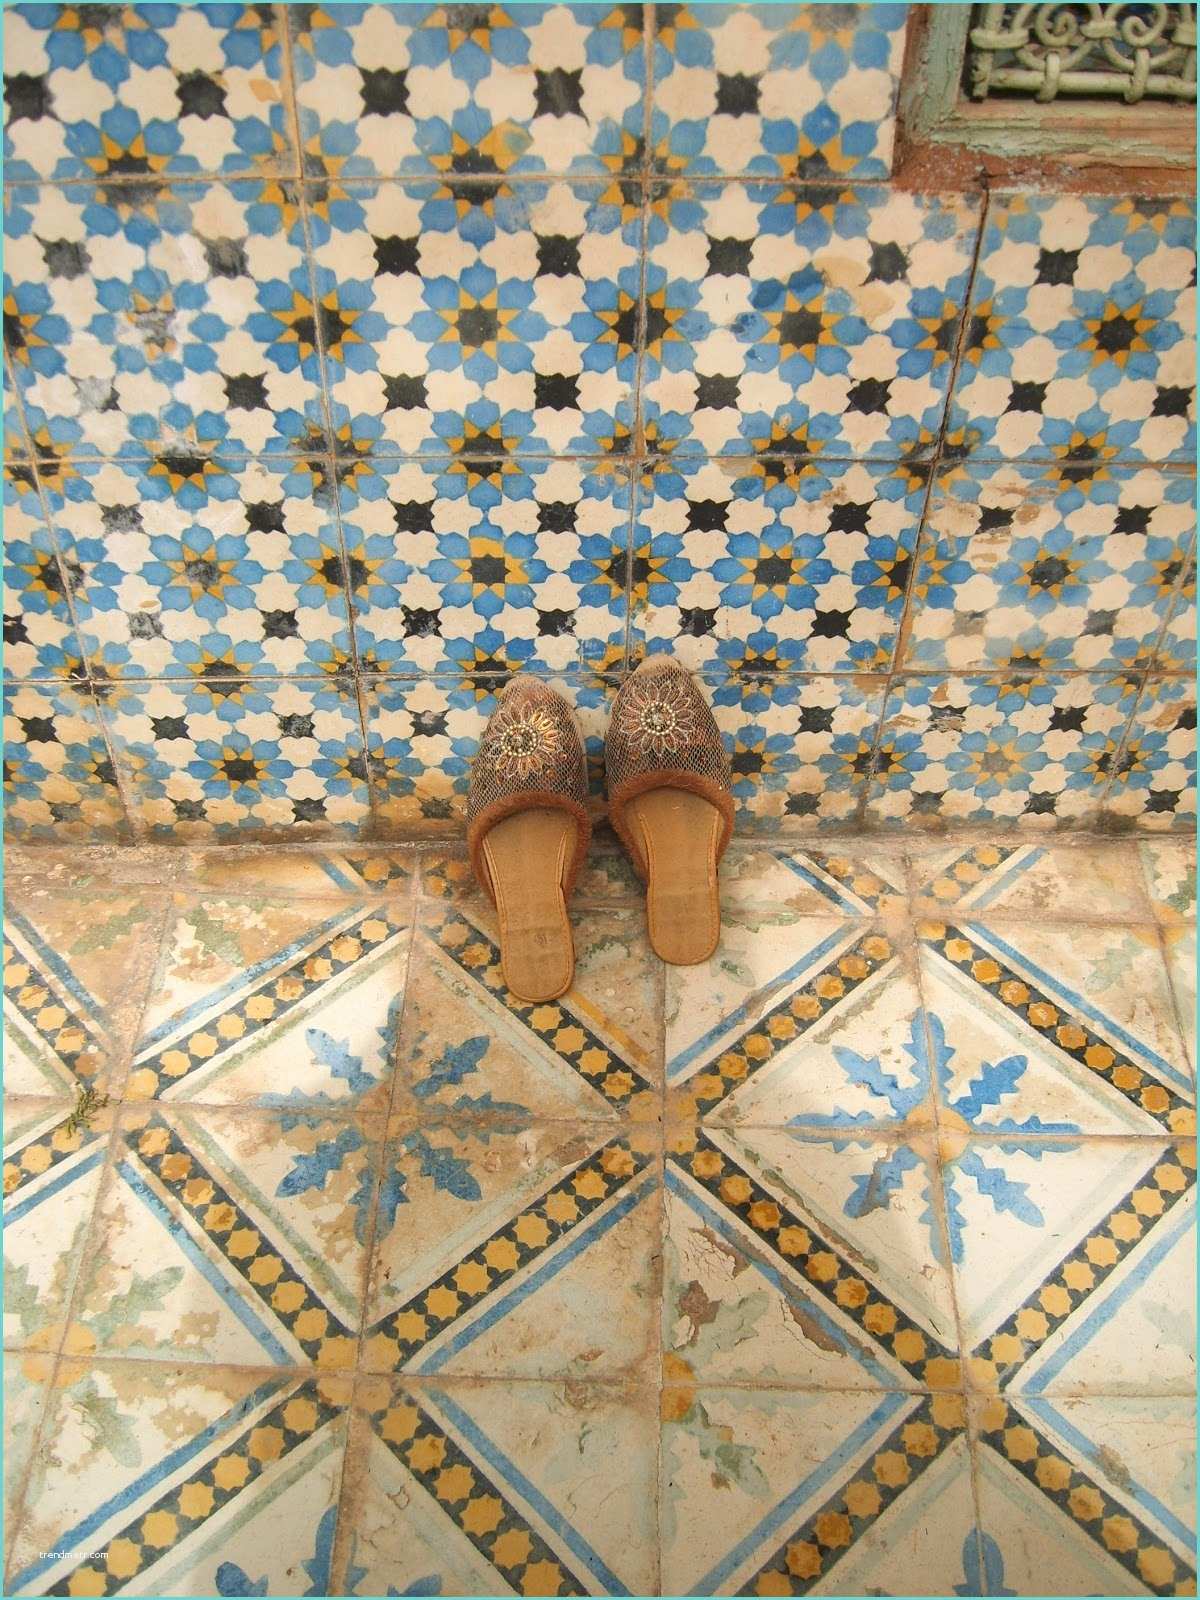 Morroccan Floor Tiles A Passage to Tangier the Zellij Of Morocco